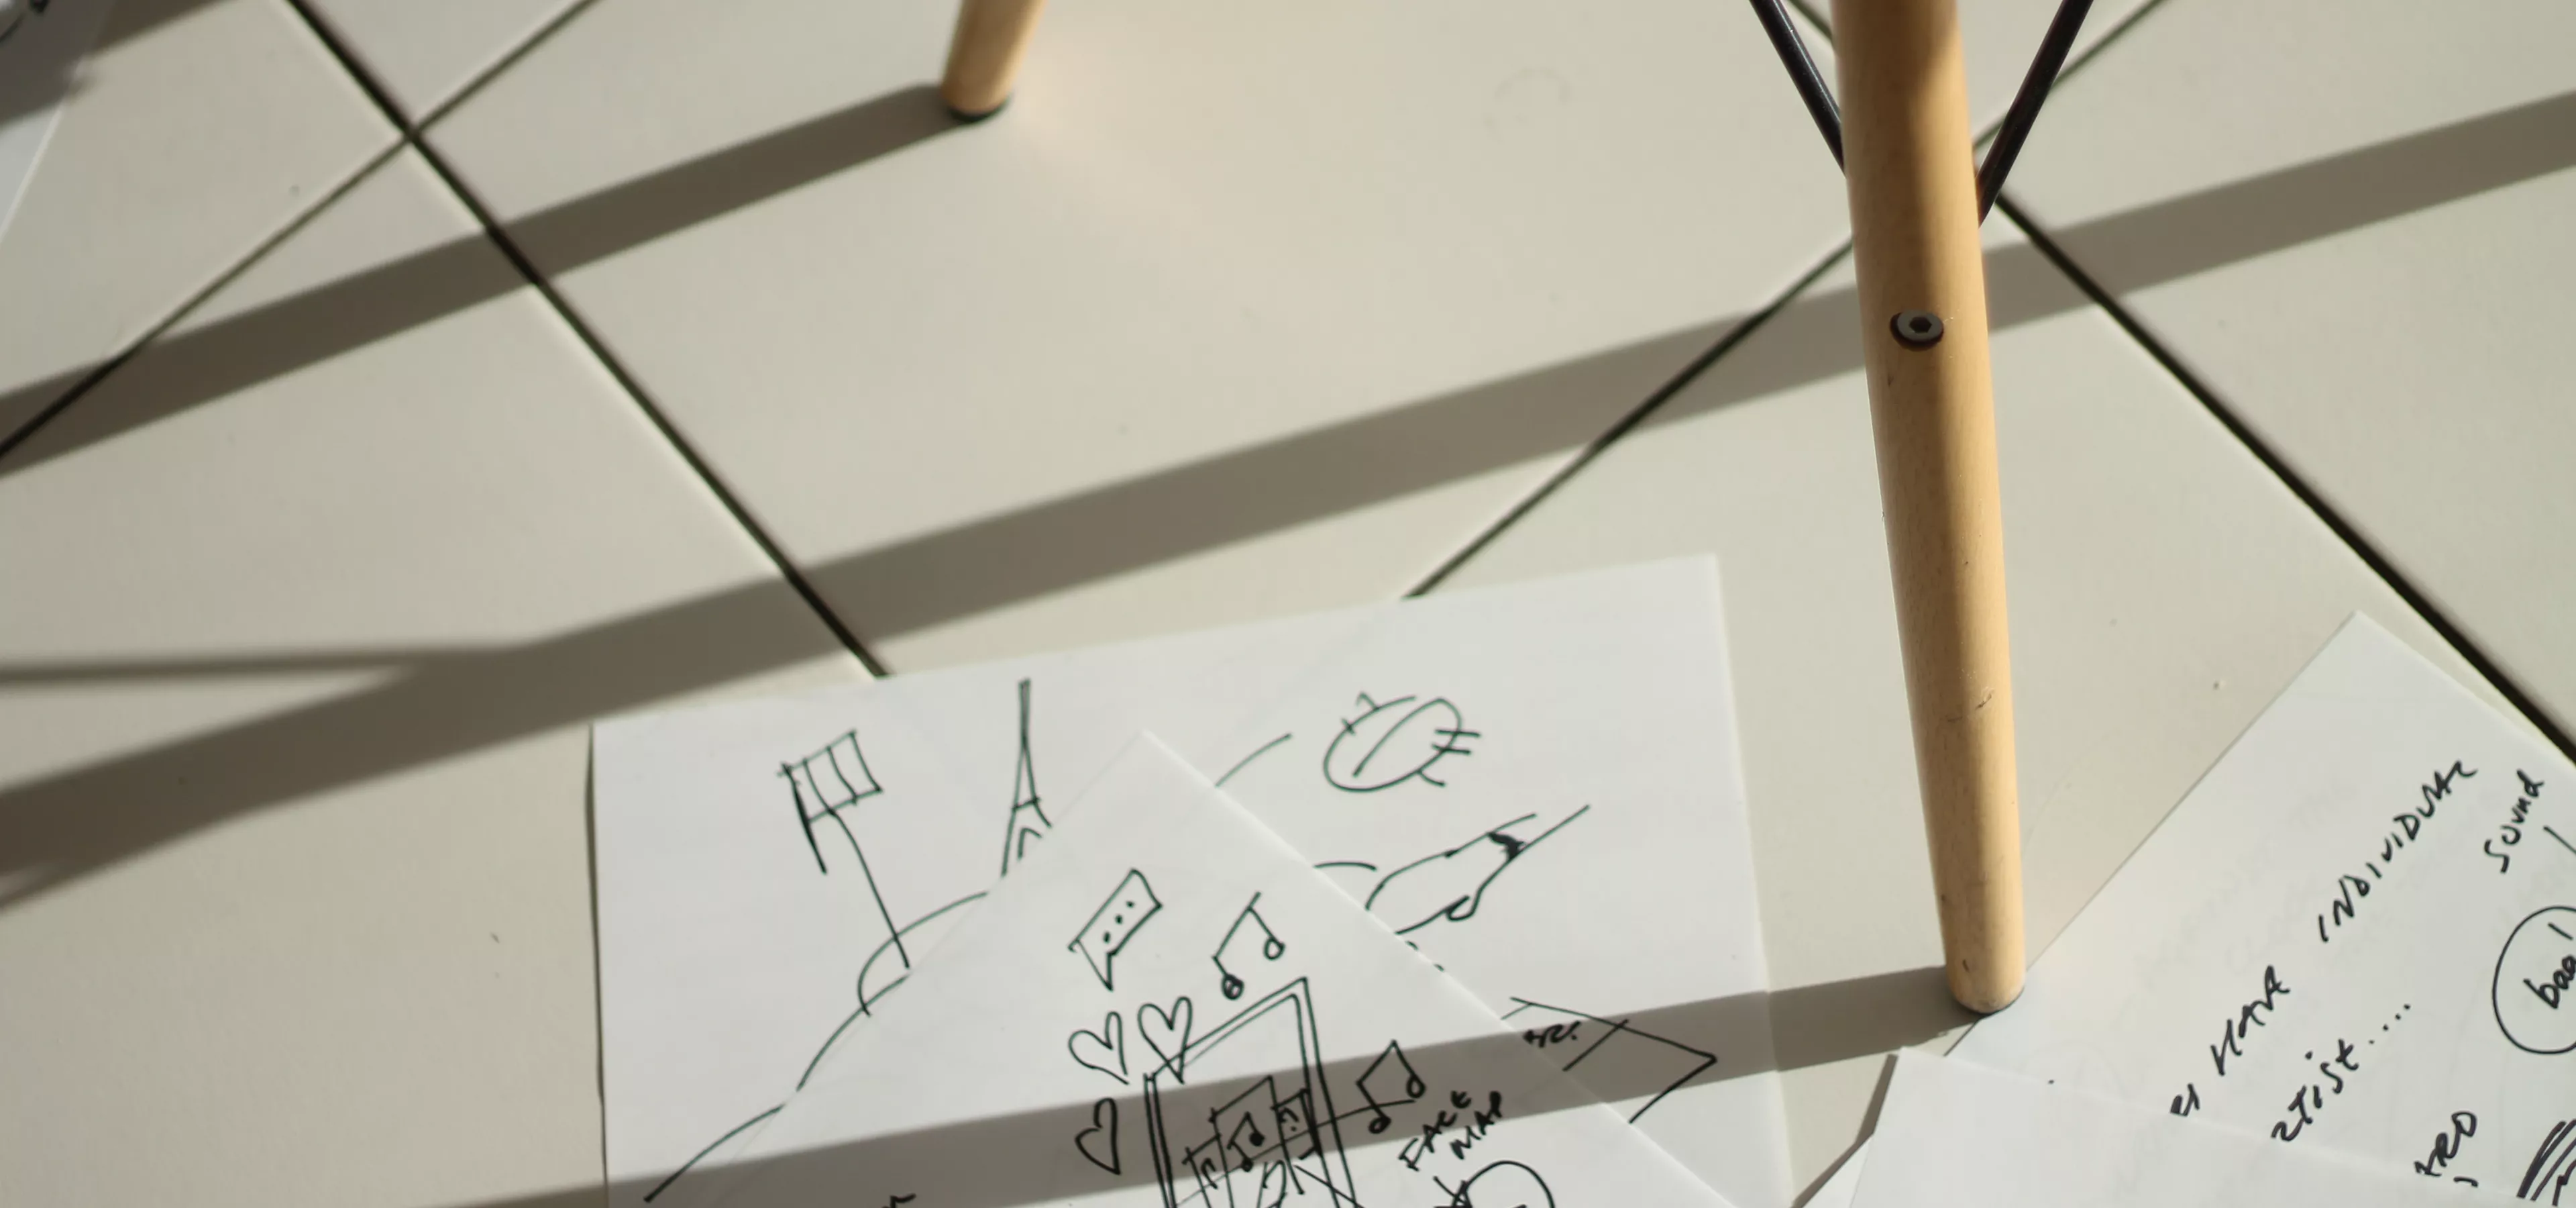 Design sketches on the floor by an Eames Chair